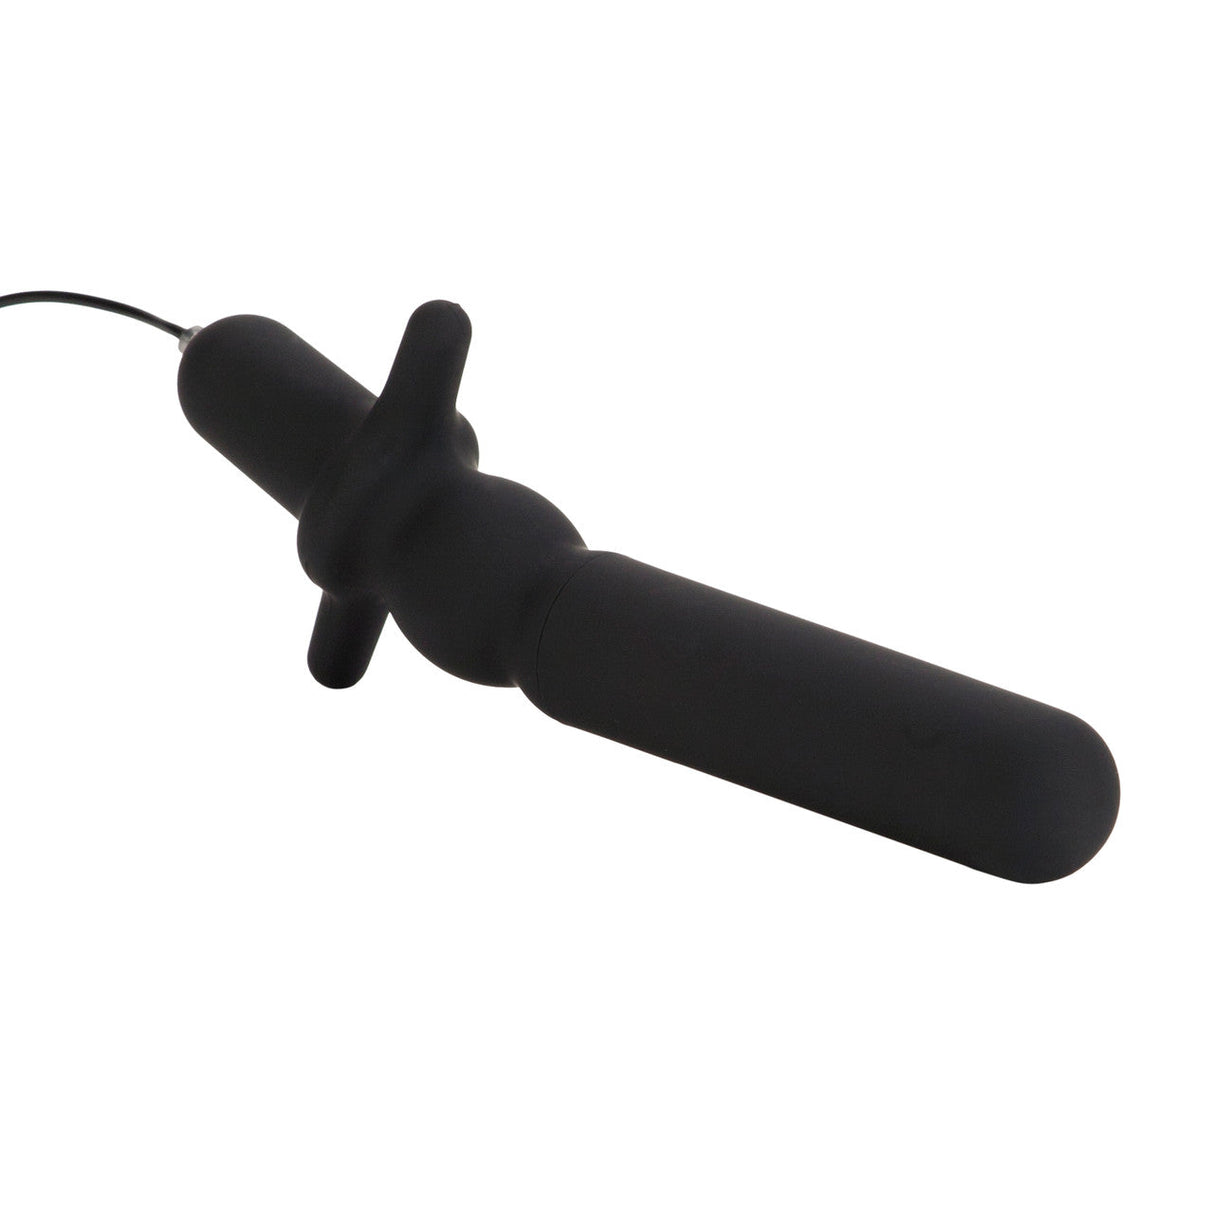 Colt 5 Inch Power Male Anal Vibrator